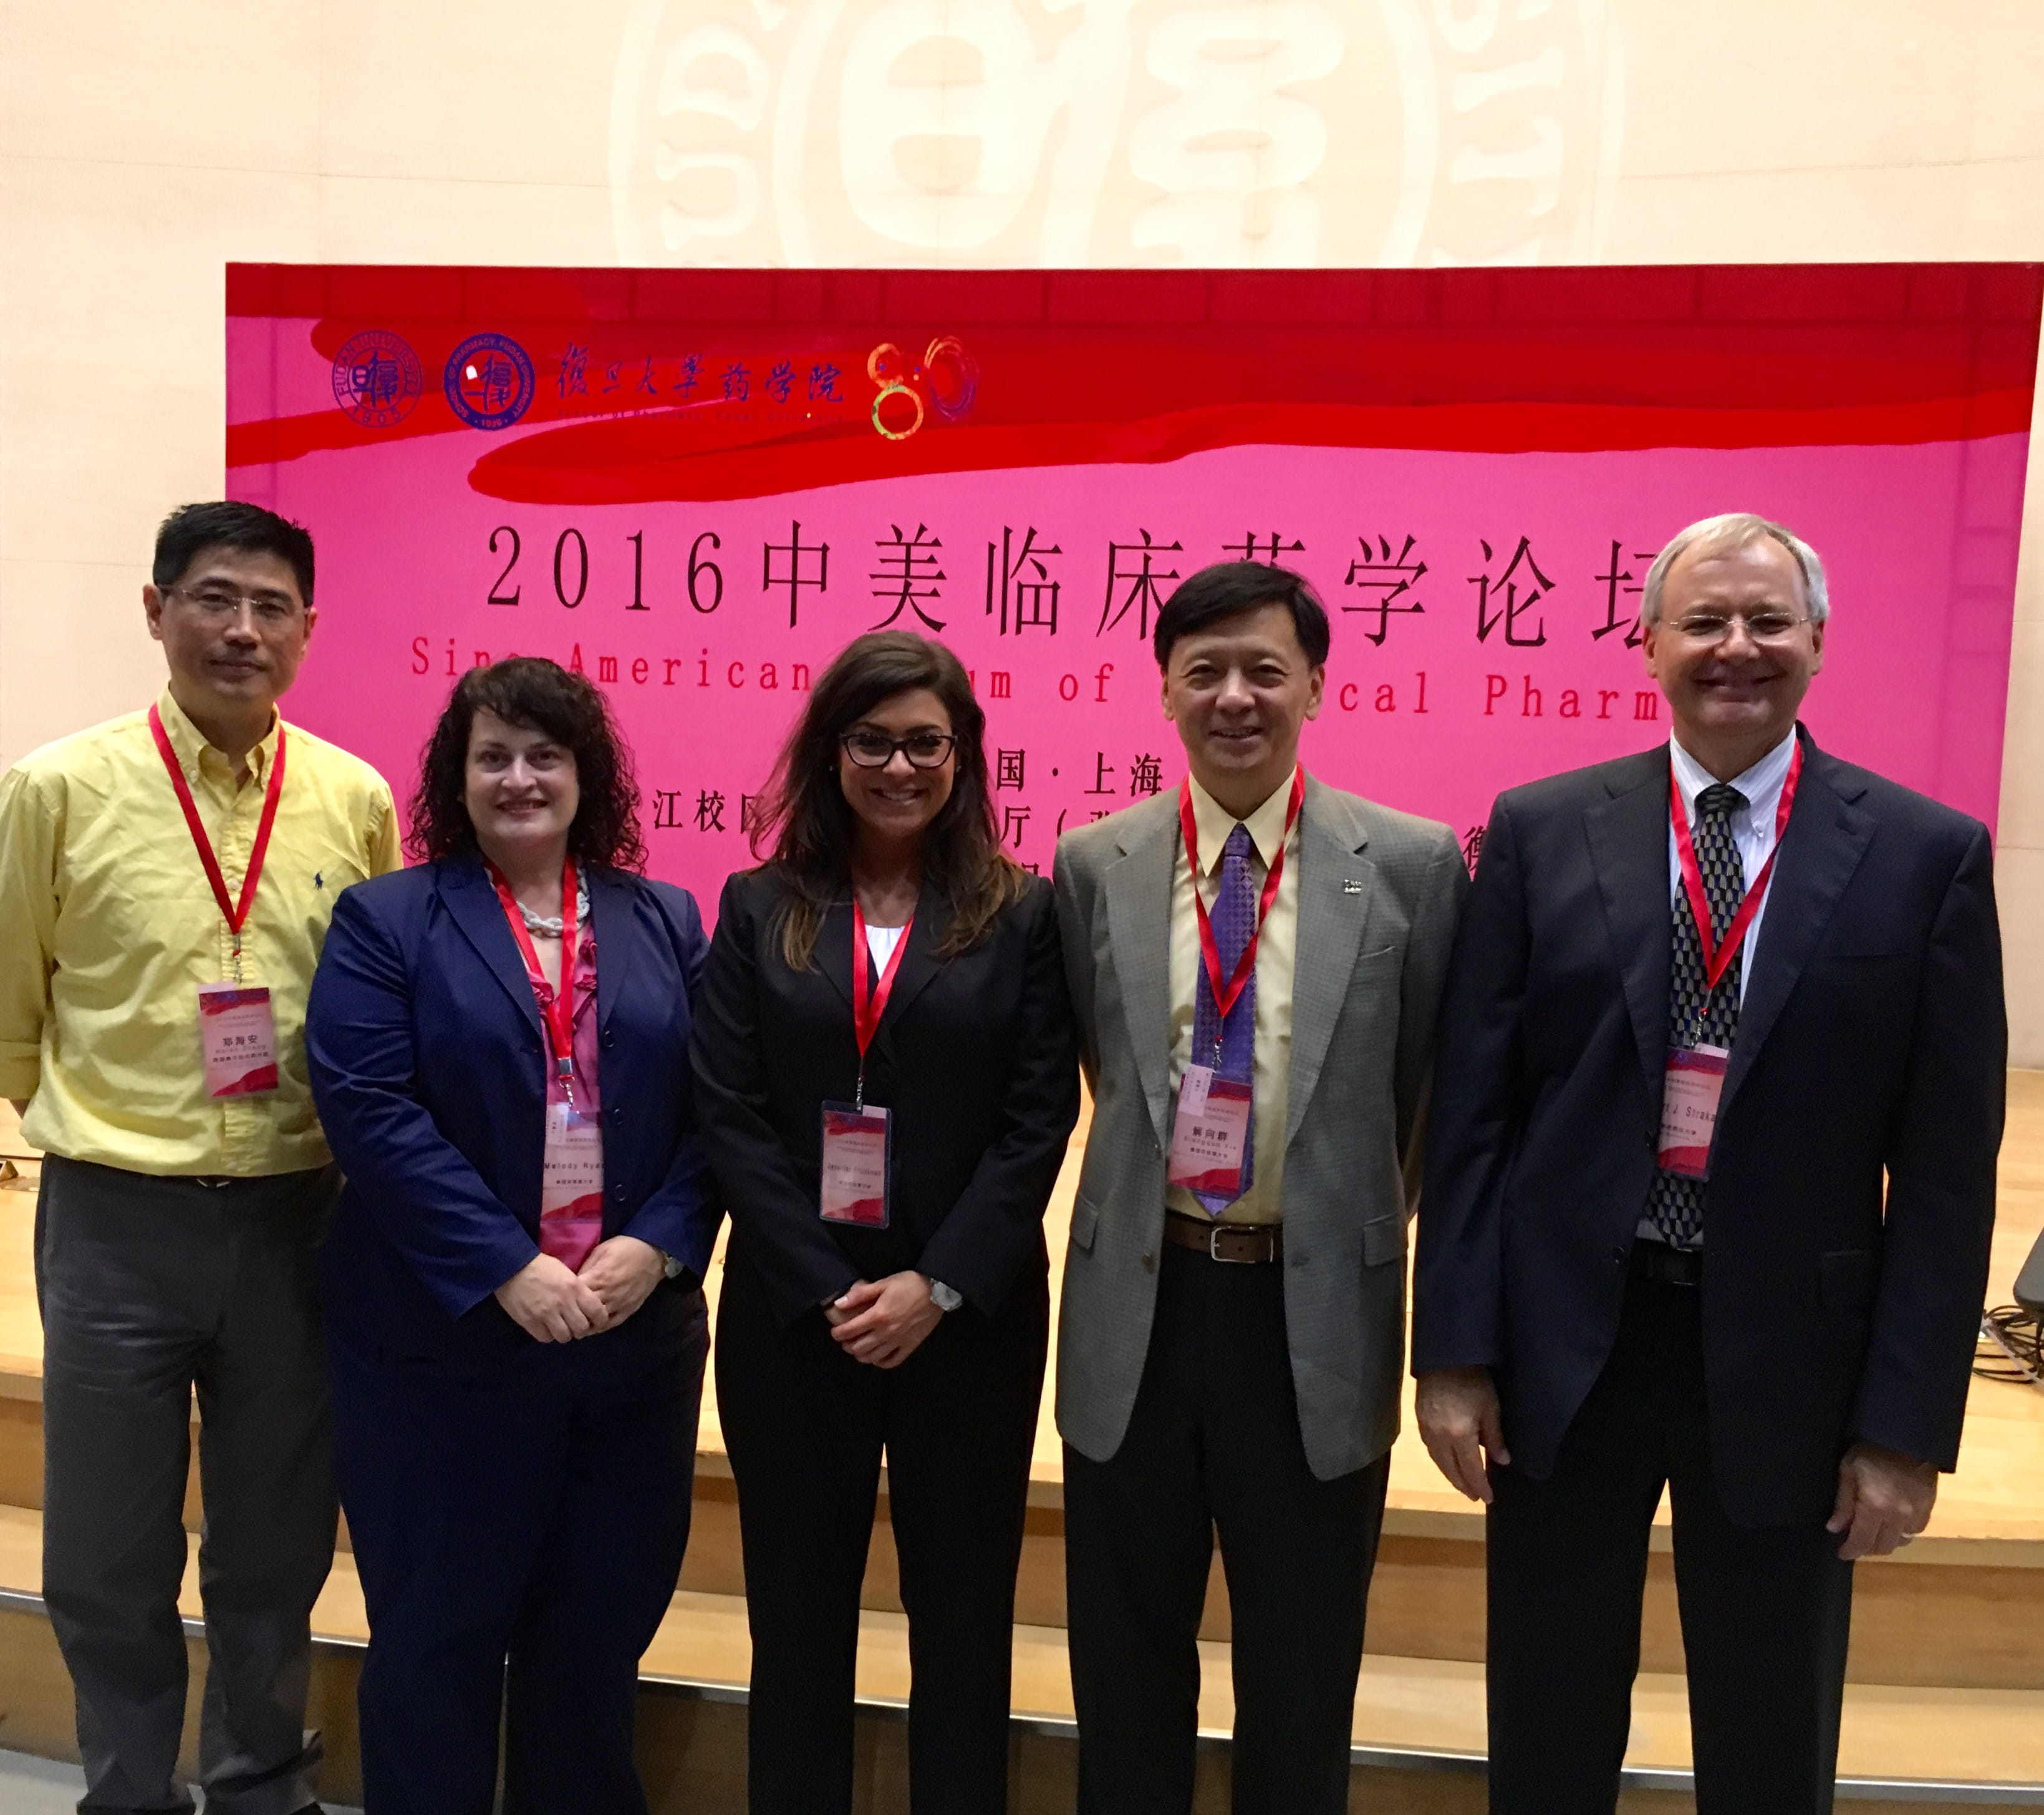 2016 Sino American Forum of Clinical Pharmacy participants